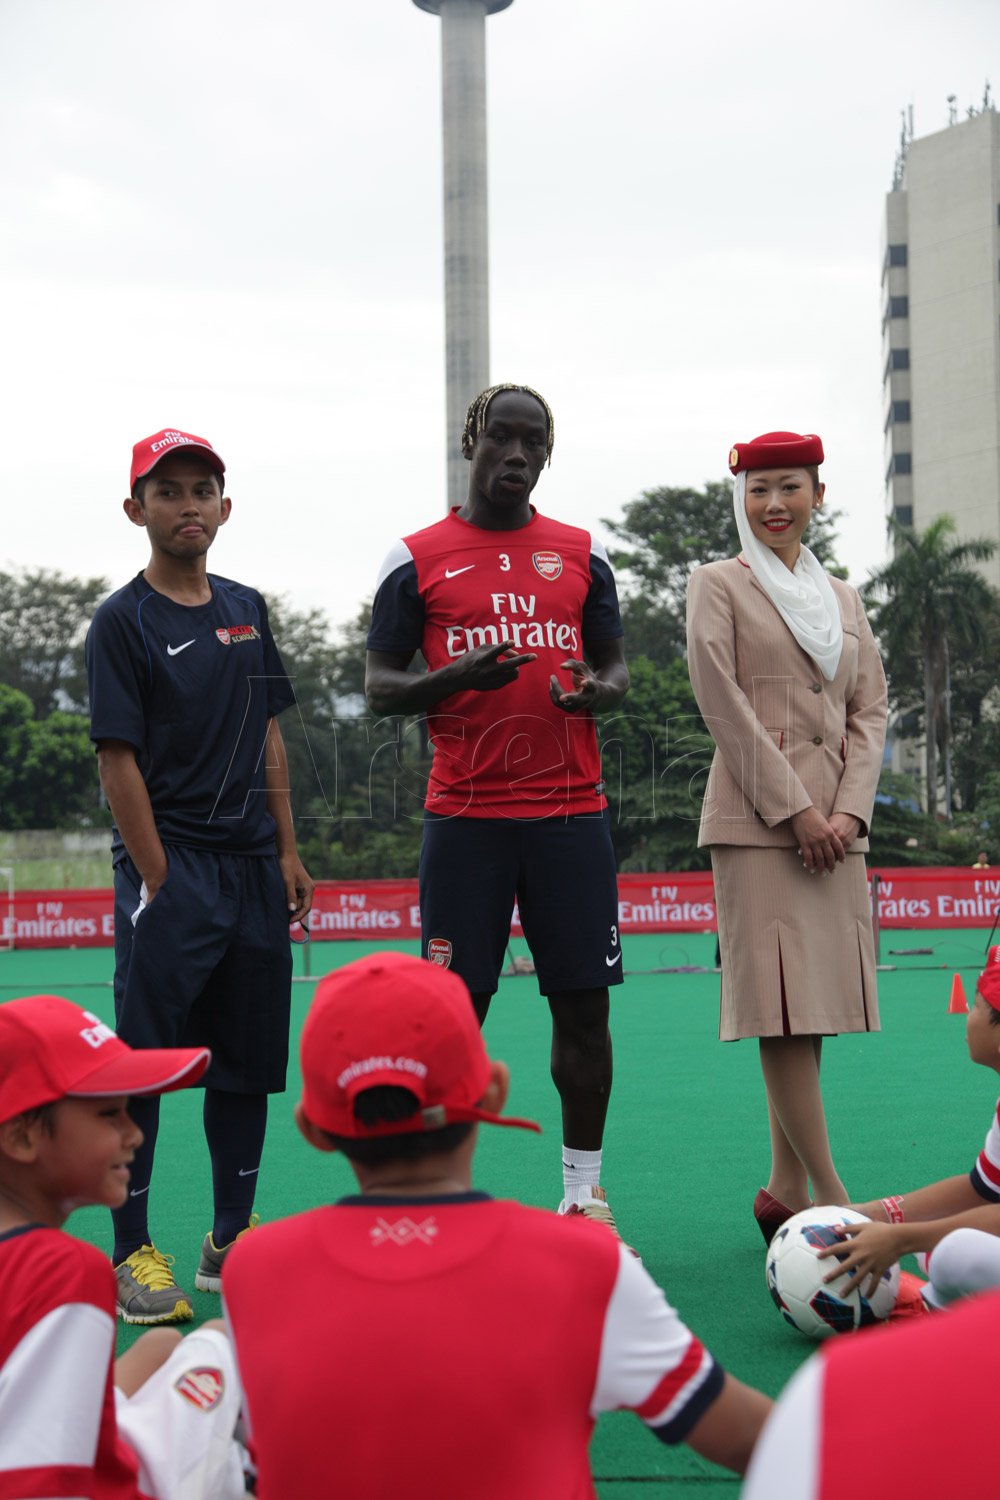 Pictures: Emirates Soccer Clinic | News | Arsenal.com